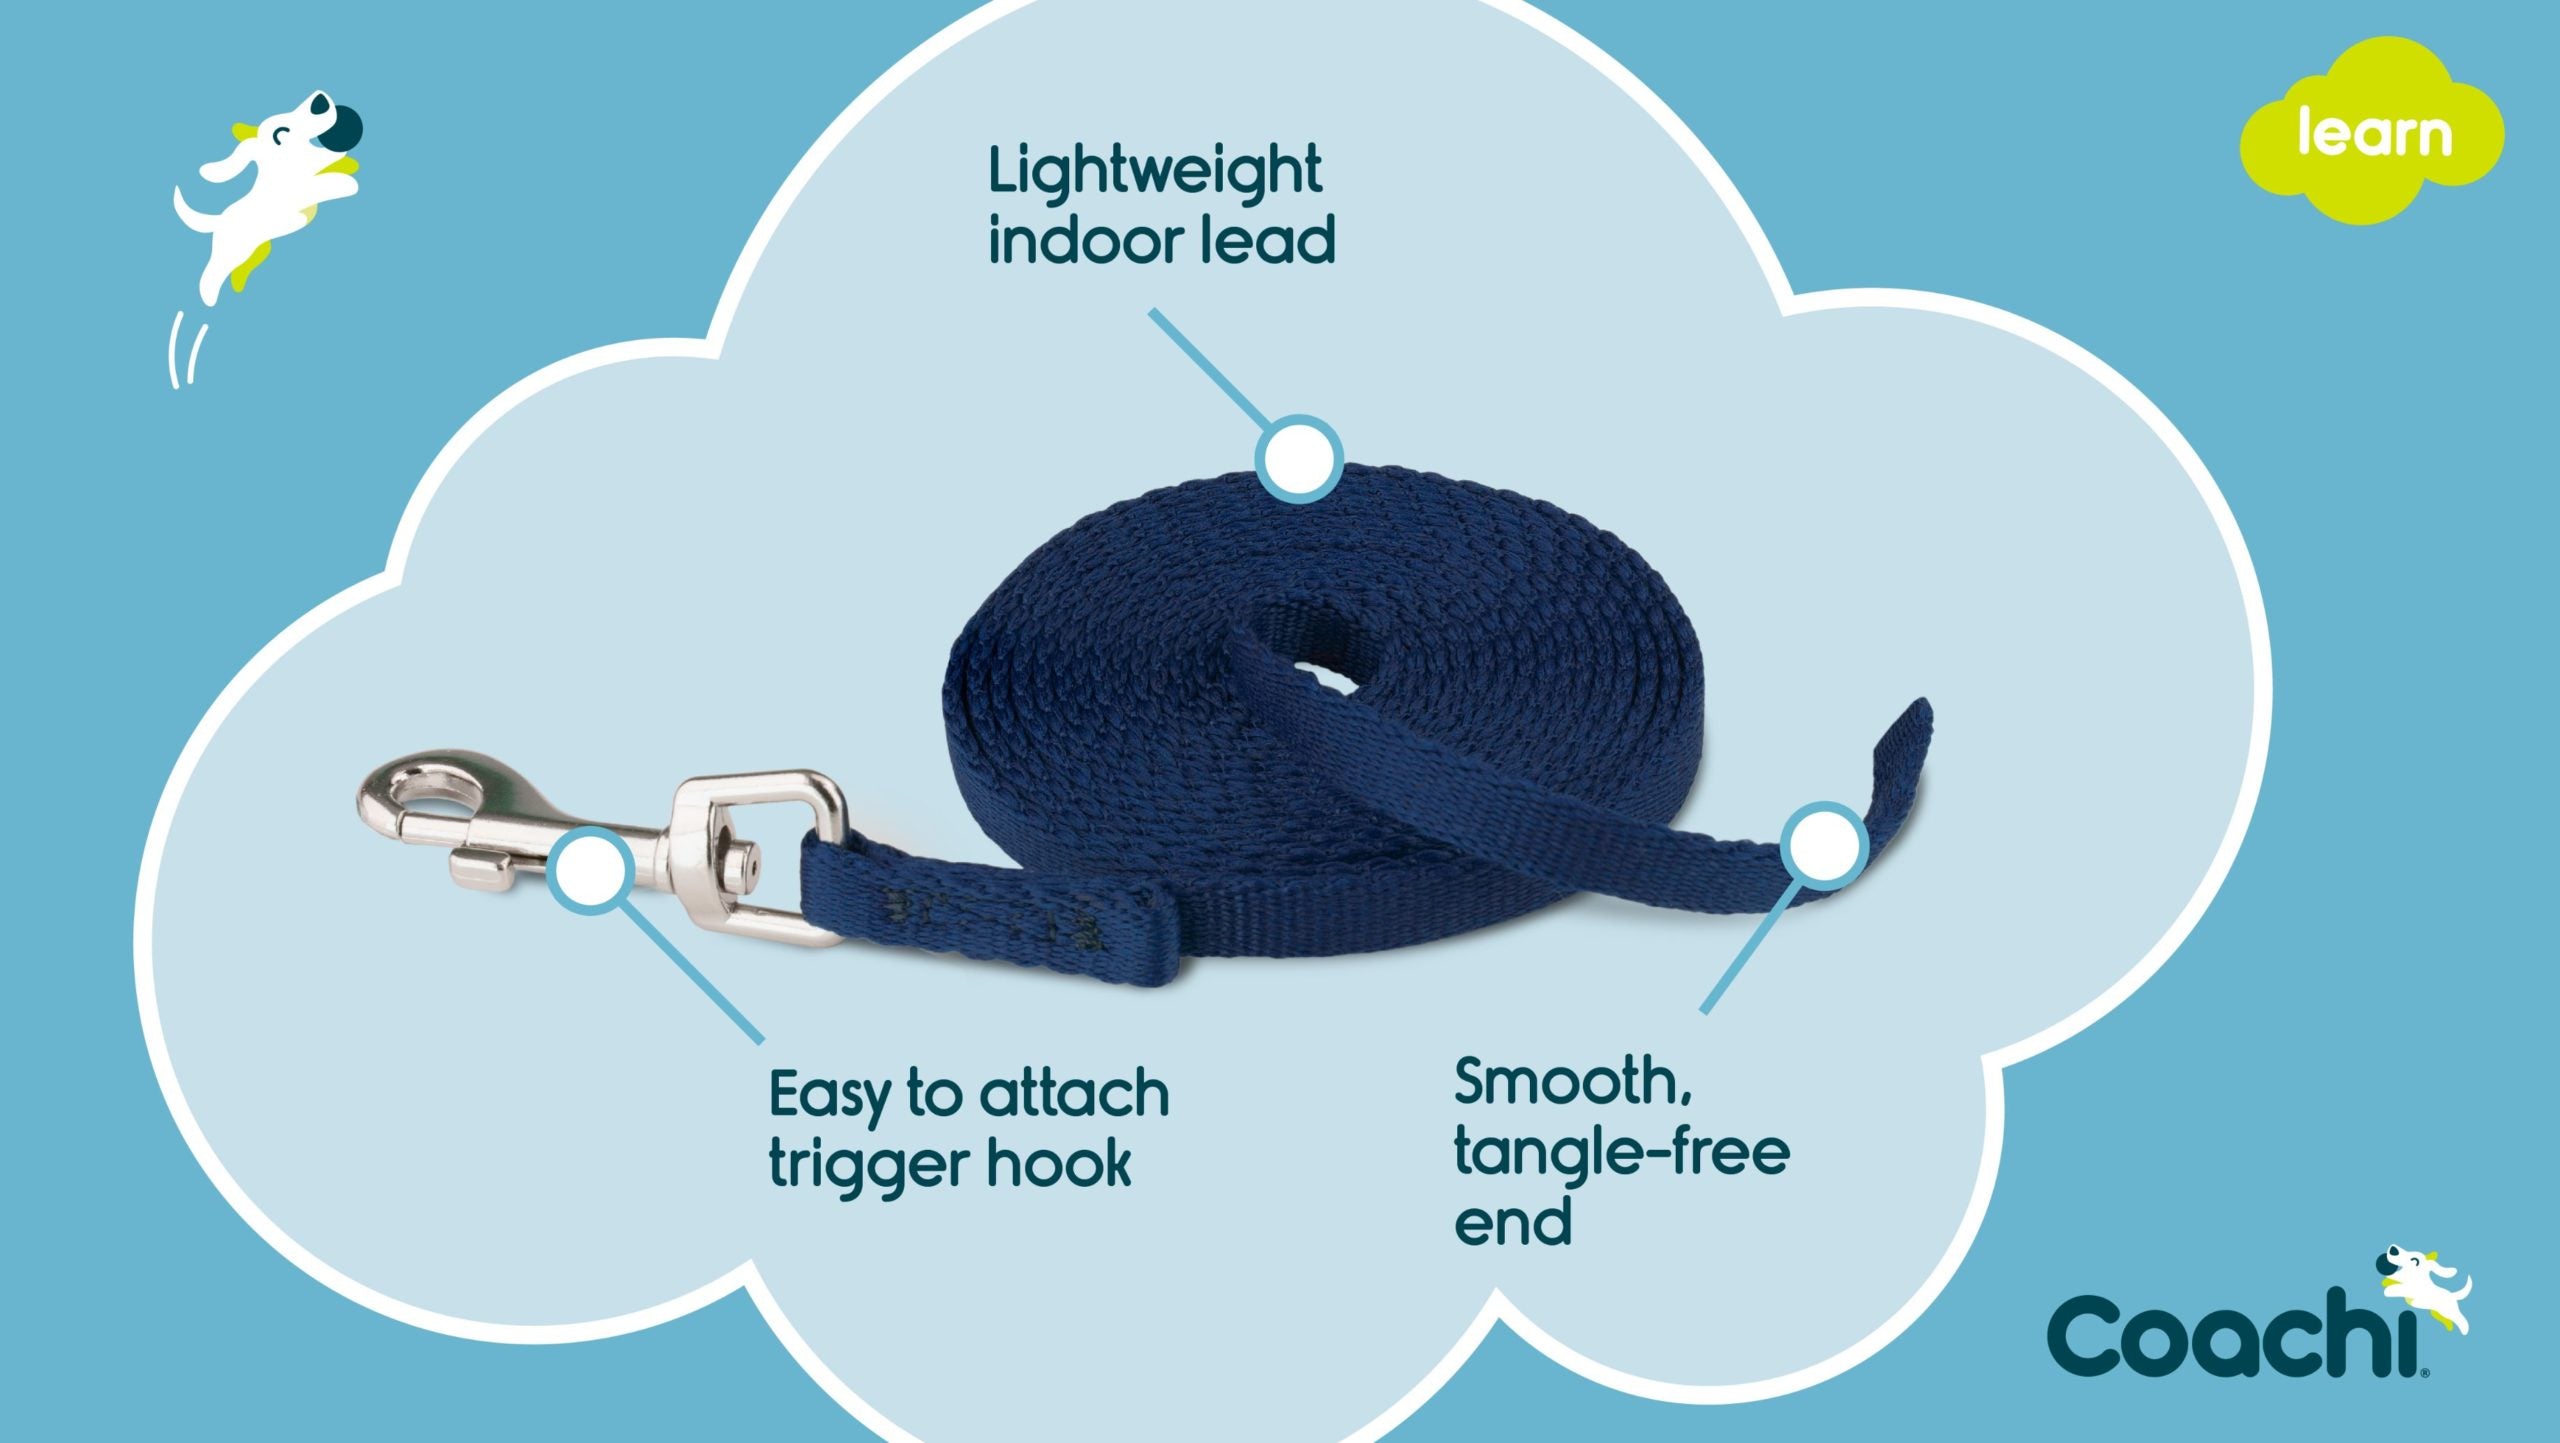 Lightweight indoor lead. Easy to attach trigger hook. Smooth, tangle-free end.